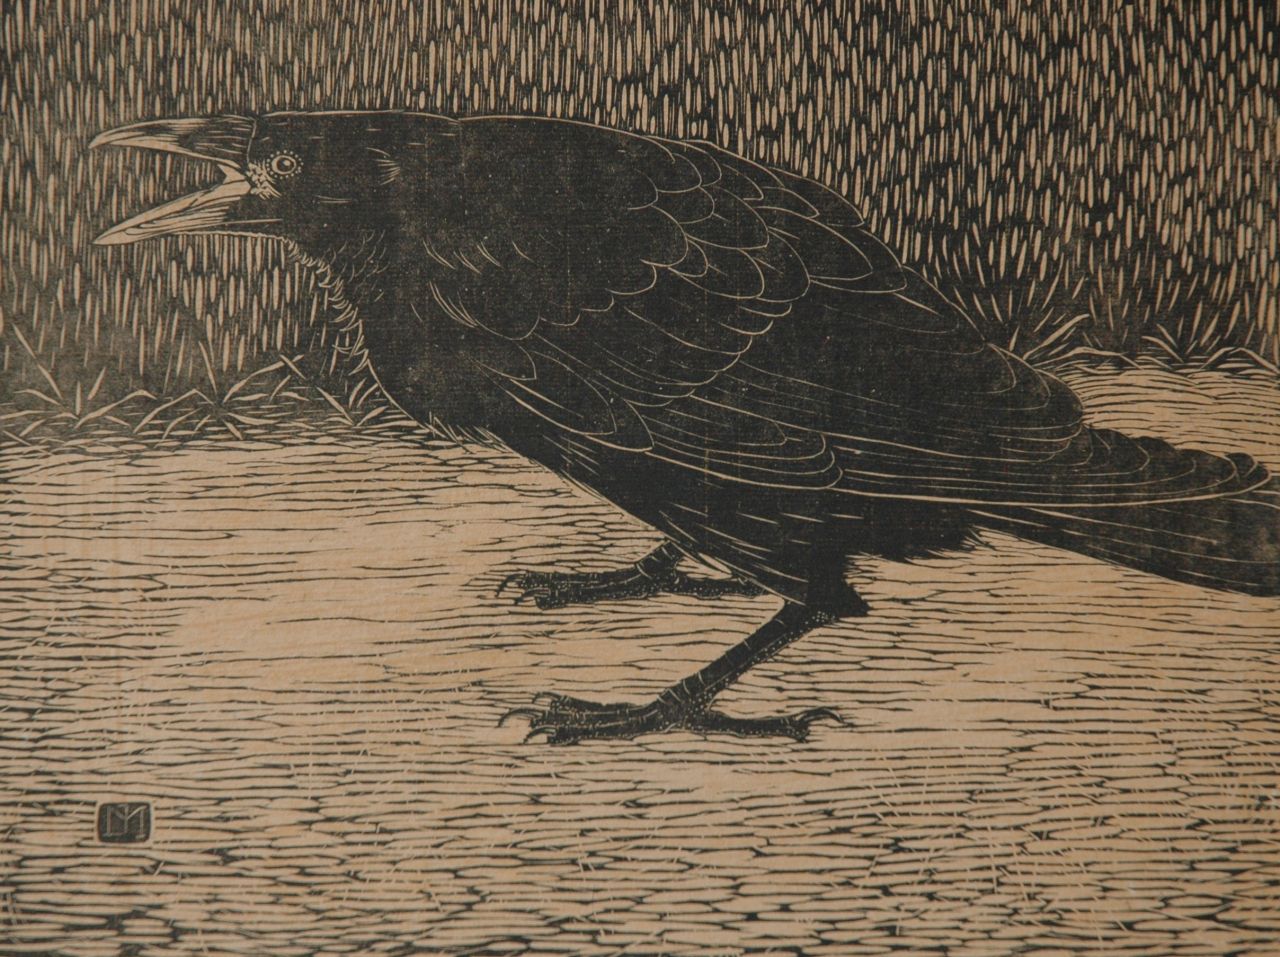 Mankes J.  | Jan Mankes, Screaming crow, woodcut on paper 18.3 x 23.8 cm, signed with monogram in the block and executed in 1918